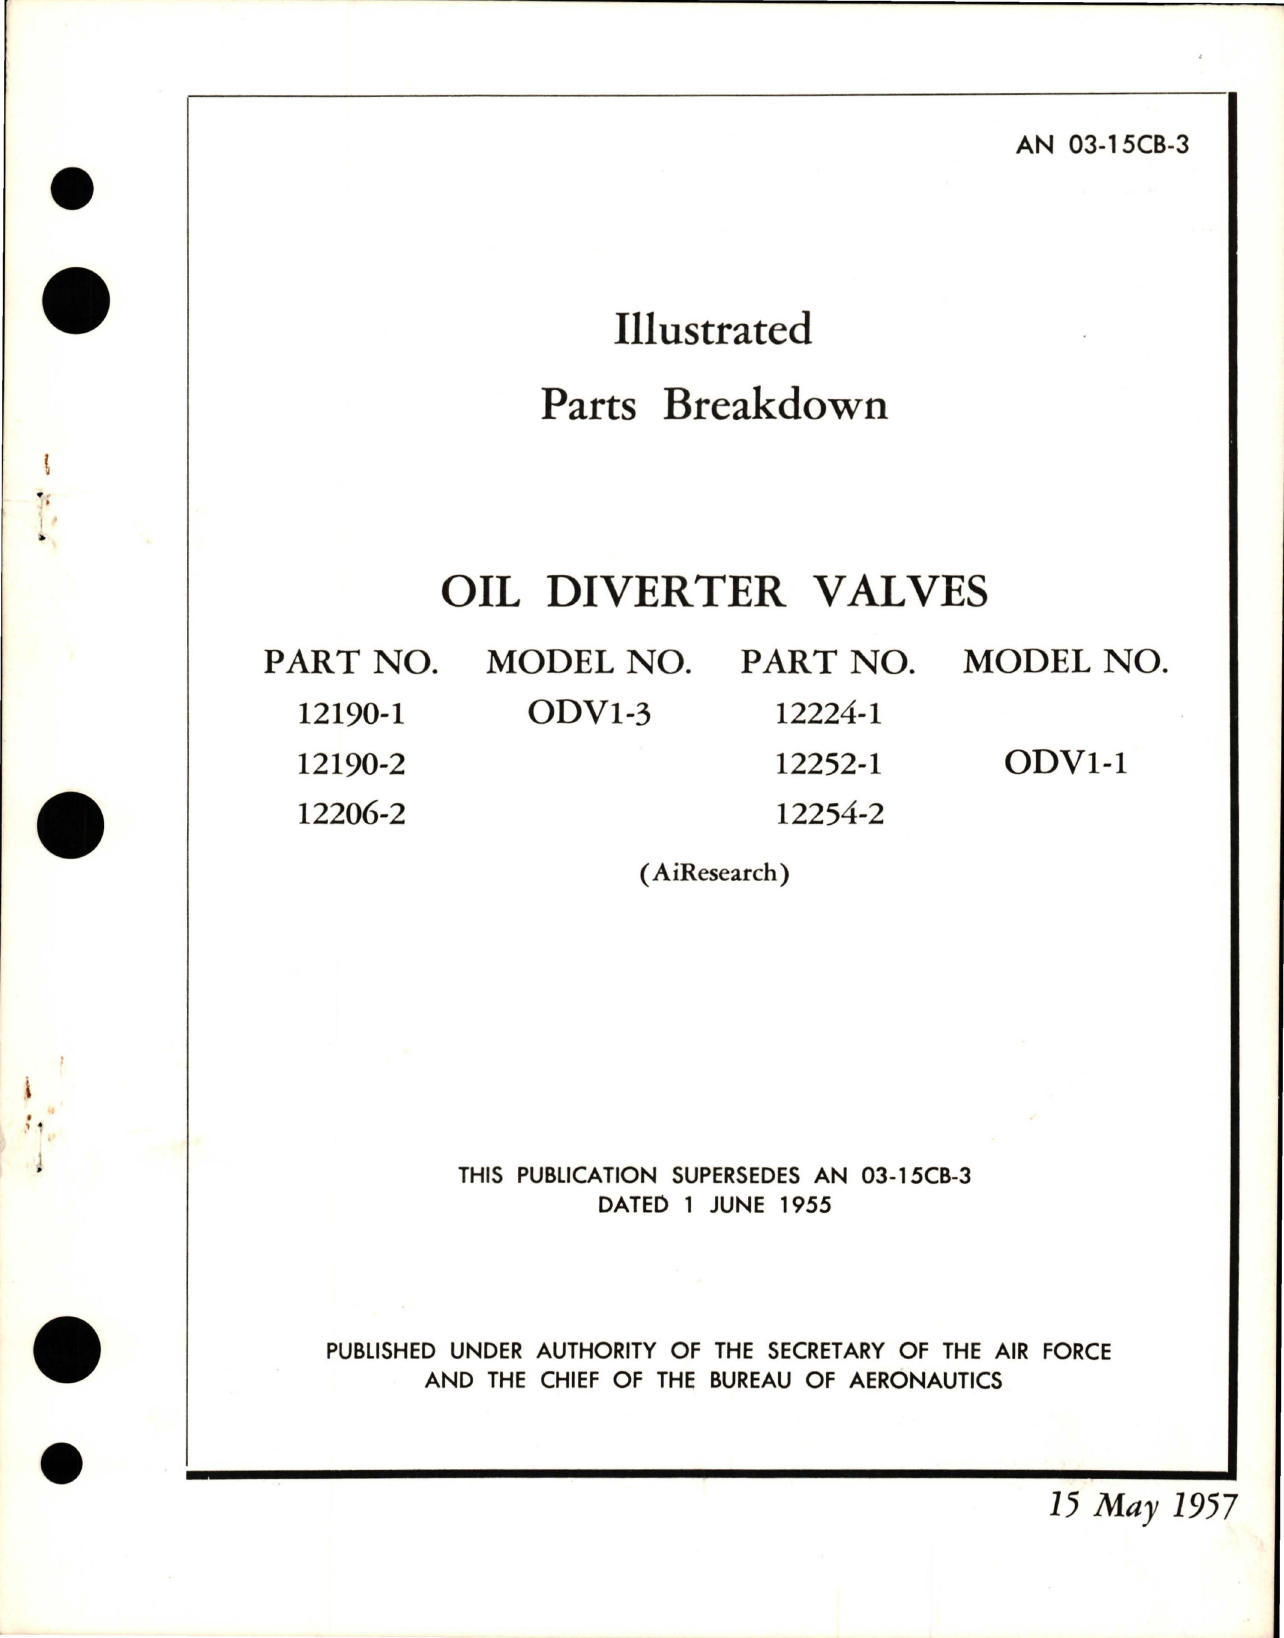 Sample page 1 from AirCorps Library document: Illustrated Parts Breakdown for Oil Diverter Valves